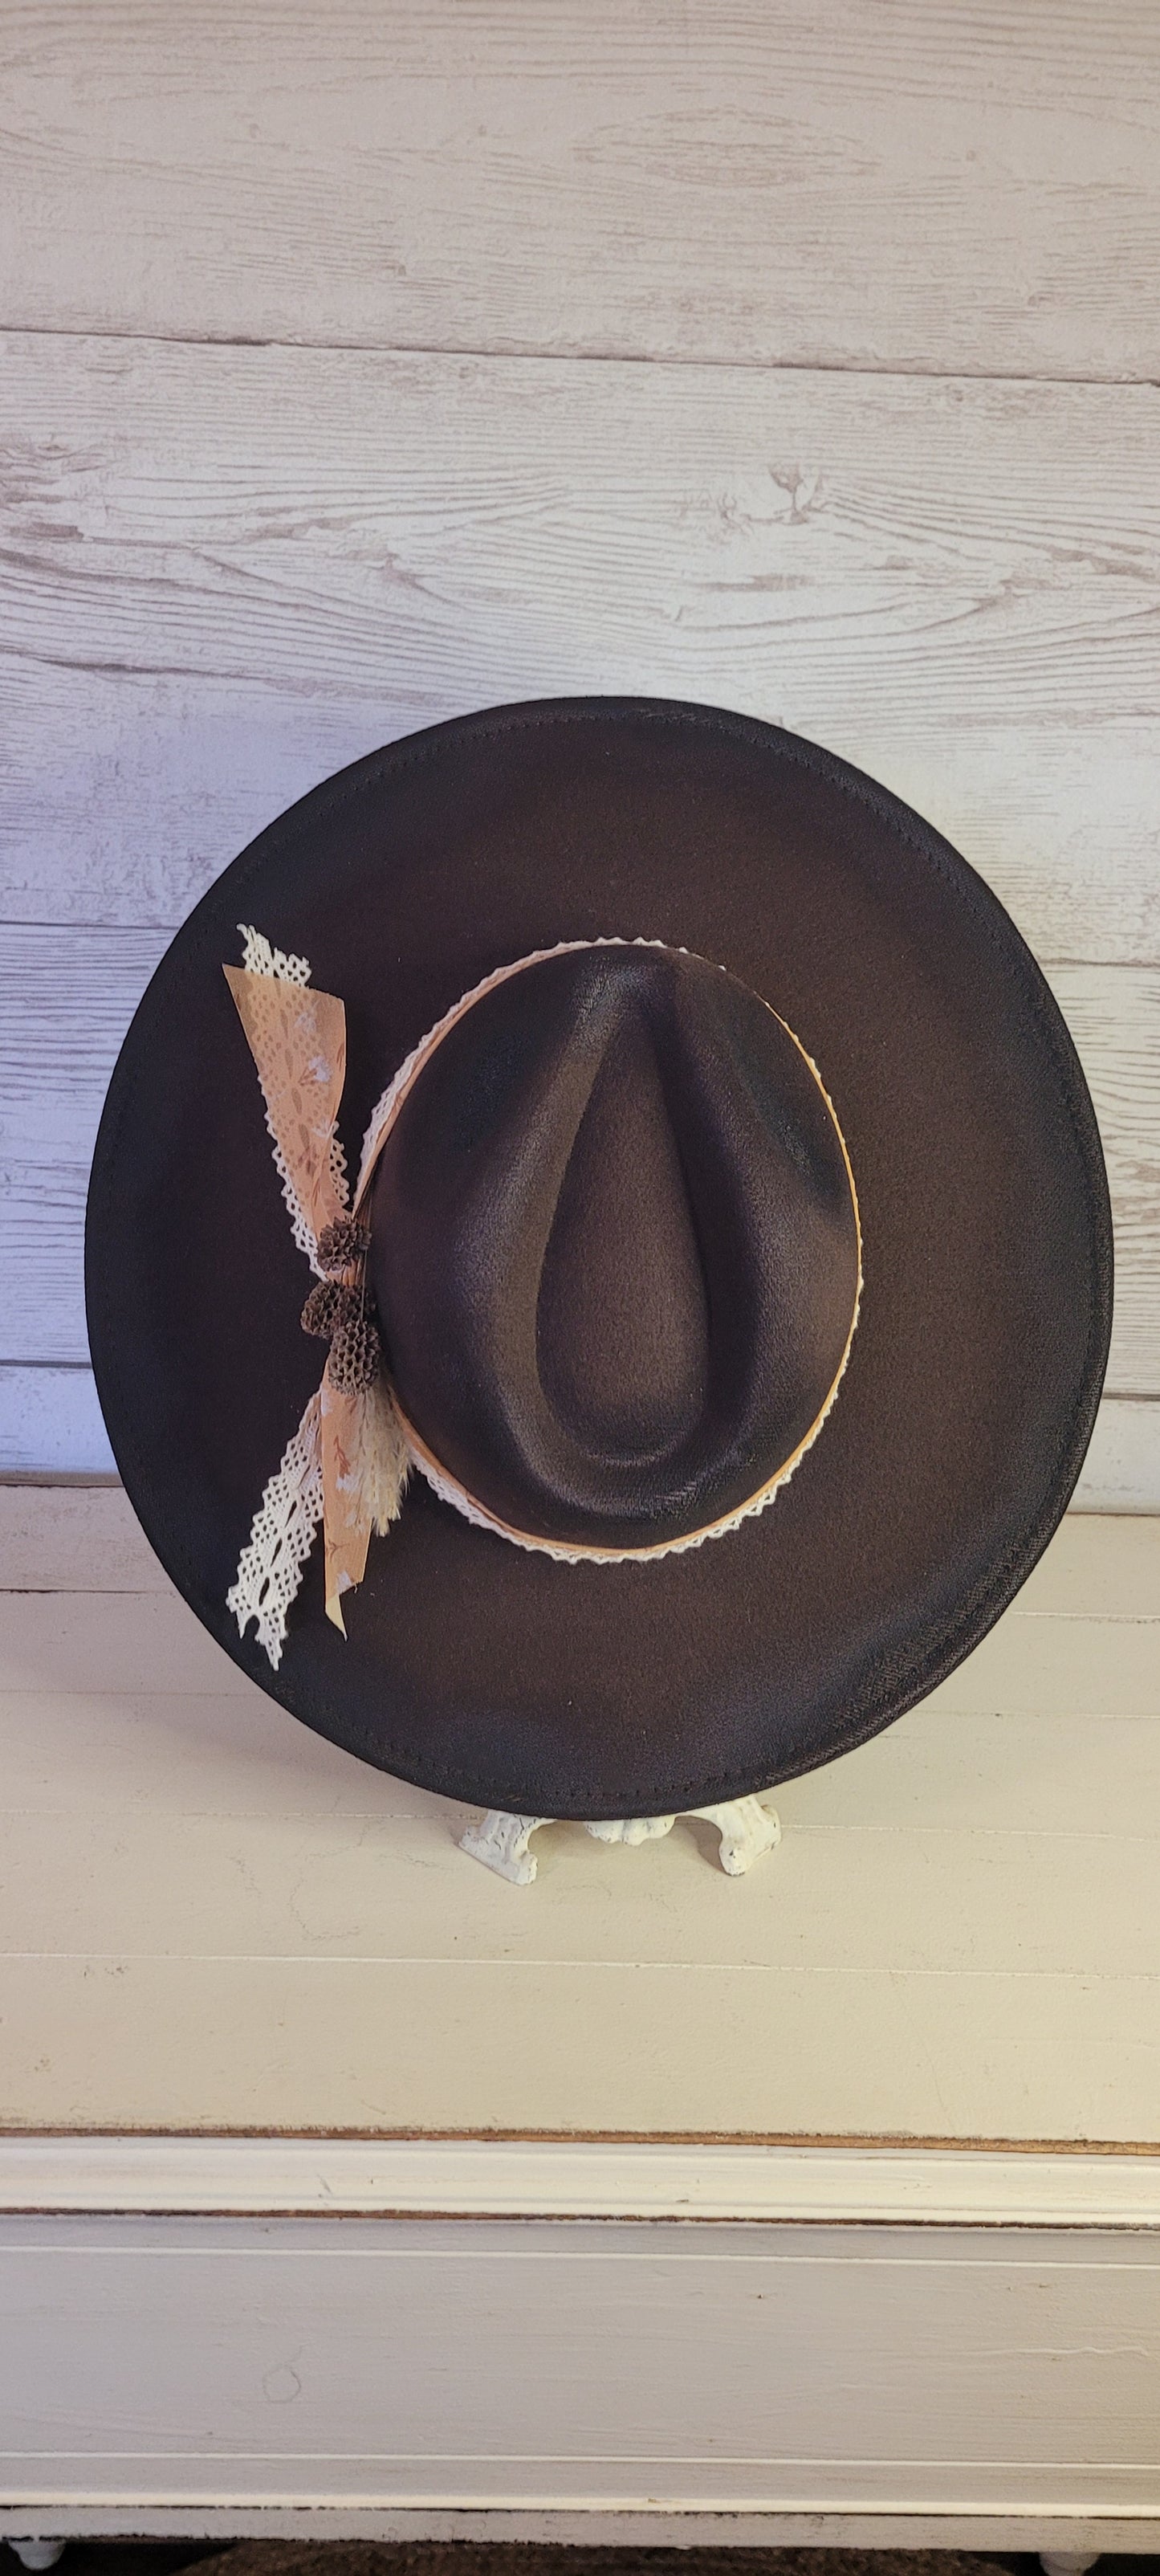 Features natural lace ribbon, sheer mustard ribbon, pine cones, & pampas Felt hat Flat brim 65% polyester and 35% cotton Ribbon drawstring for hat size adjustment Head Circumference: 24" Crown Height: 5" Brim Length: 15.75" Brim Width: 14.5" Branded & numbered inside crown Custom designed by Kayla